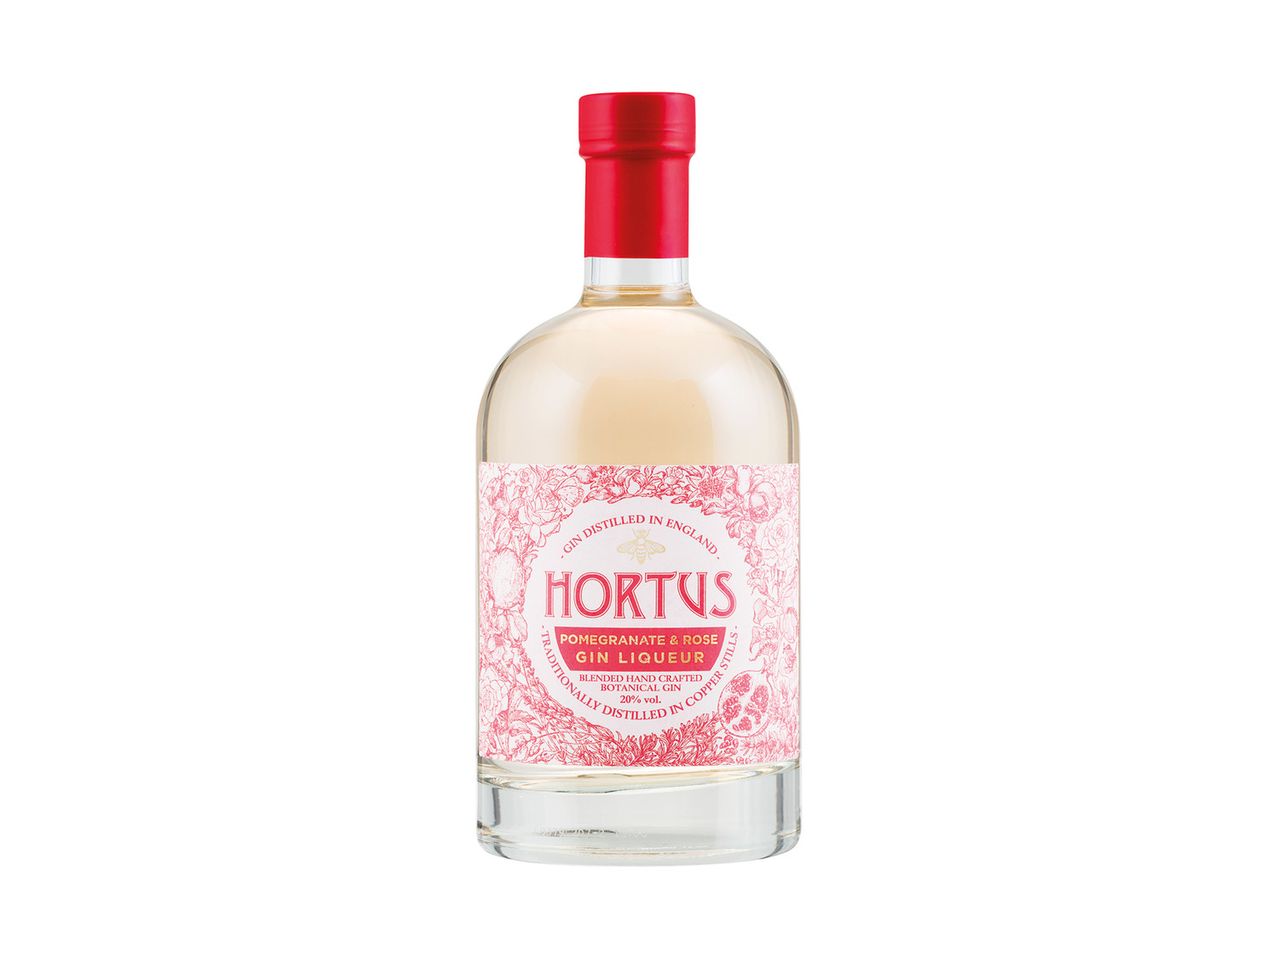 Go to full screen view: Hortus Pomegranate & Rose Gin Liqueur - Image 1